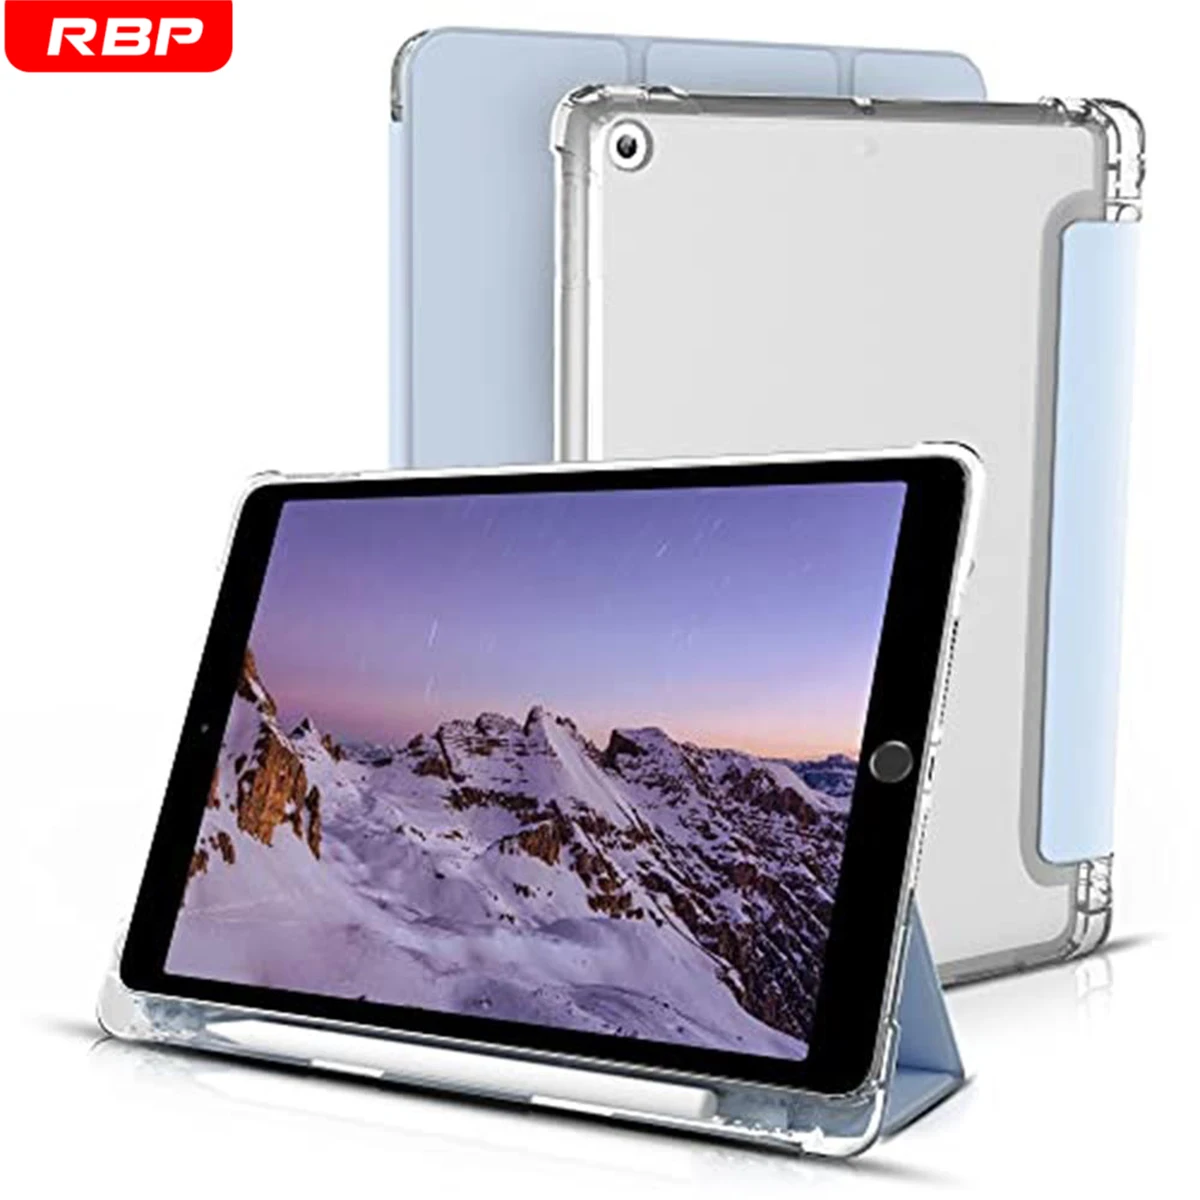 

RBP Smart Cover + TPU back Case For iPad 10.2 9.7 2021 Mini 5 6 2021 Pro 11 10.5 Air 3 4 With Pencil Slot AirBag DropProof